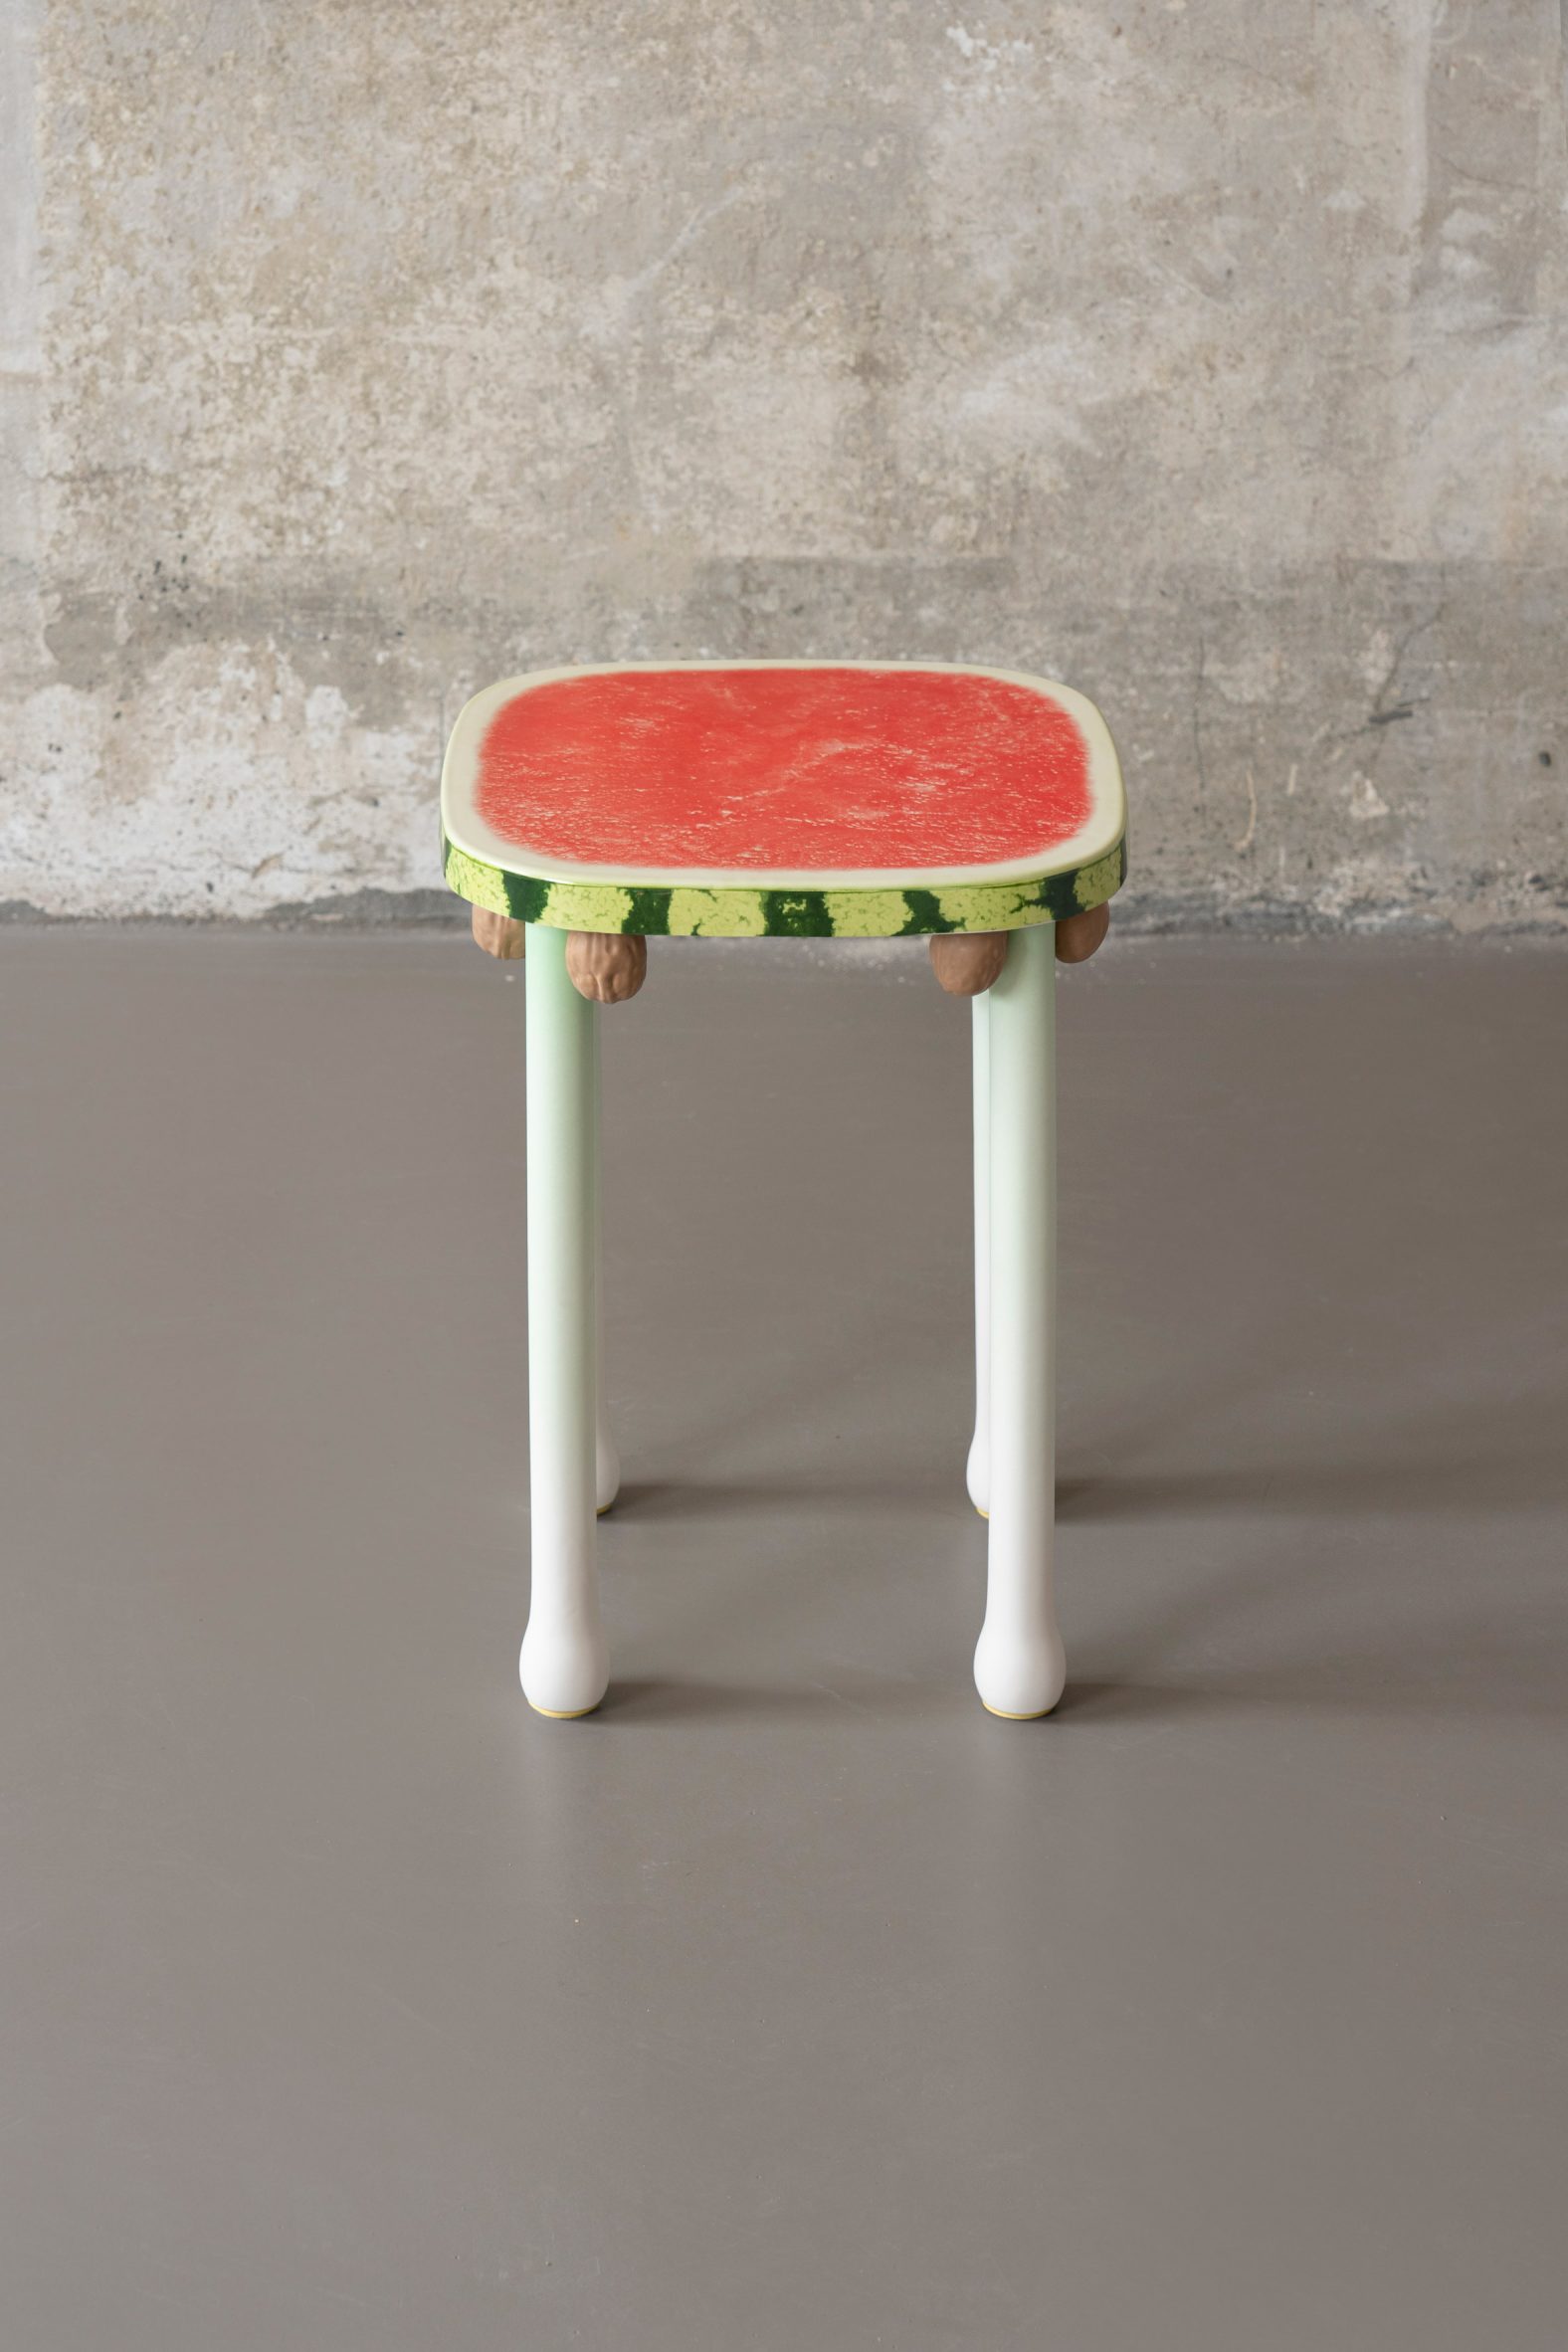 Juicy Joseph watermelon silce stool from the OMG-GMO collection